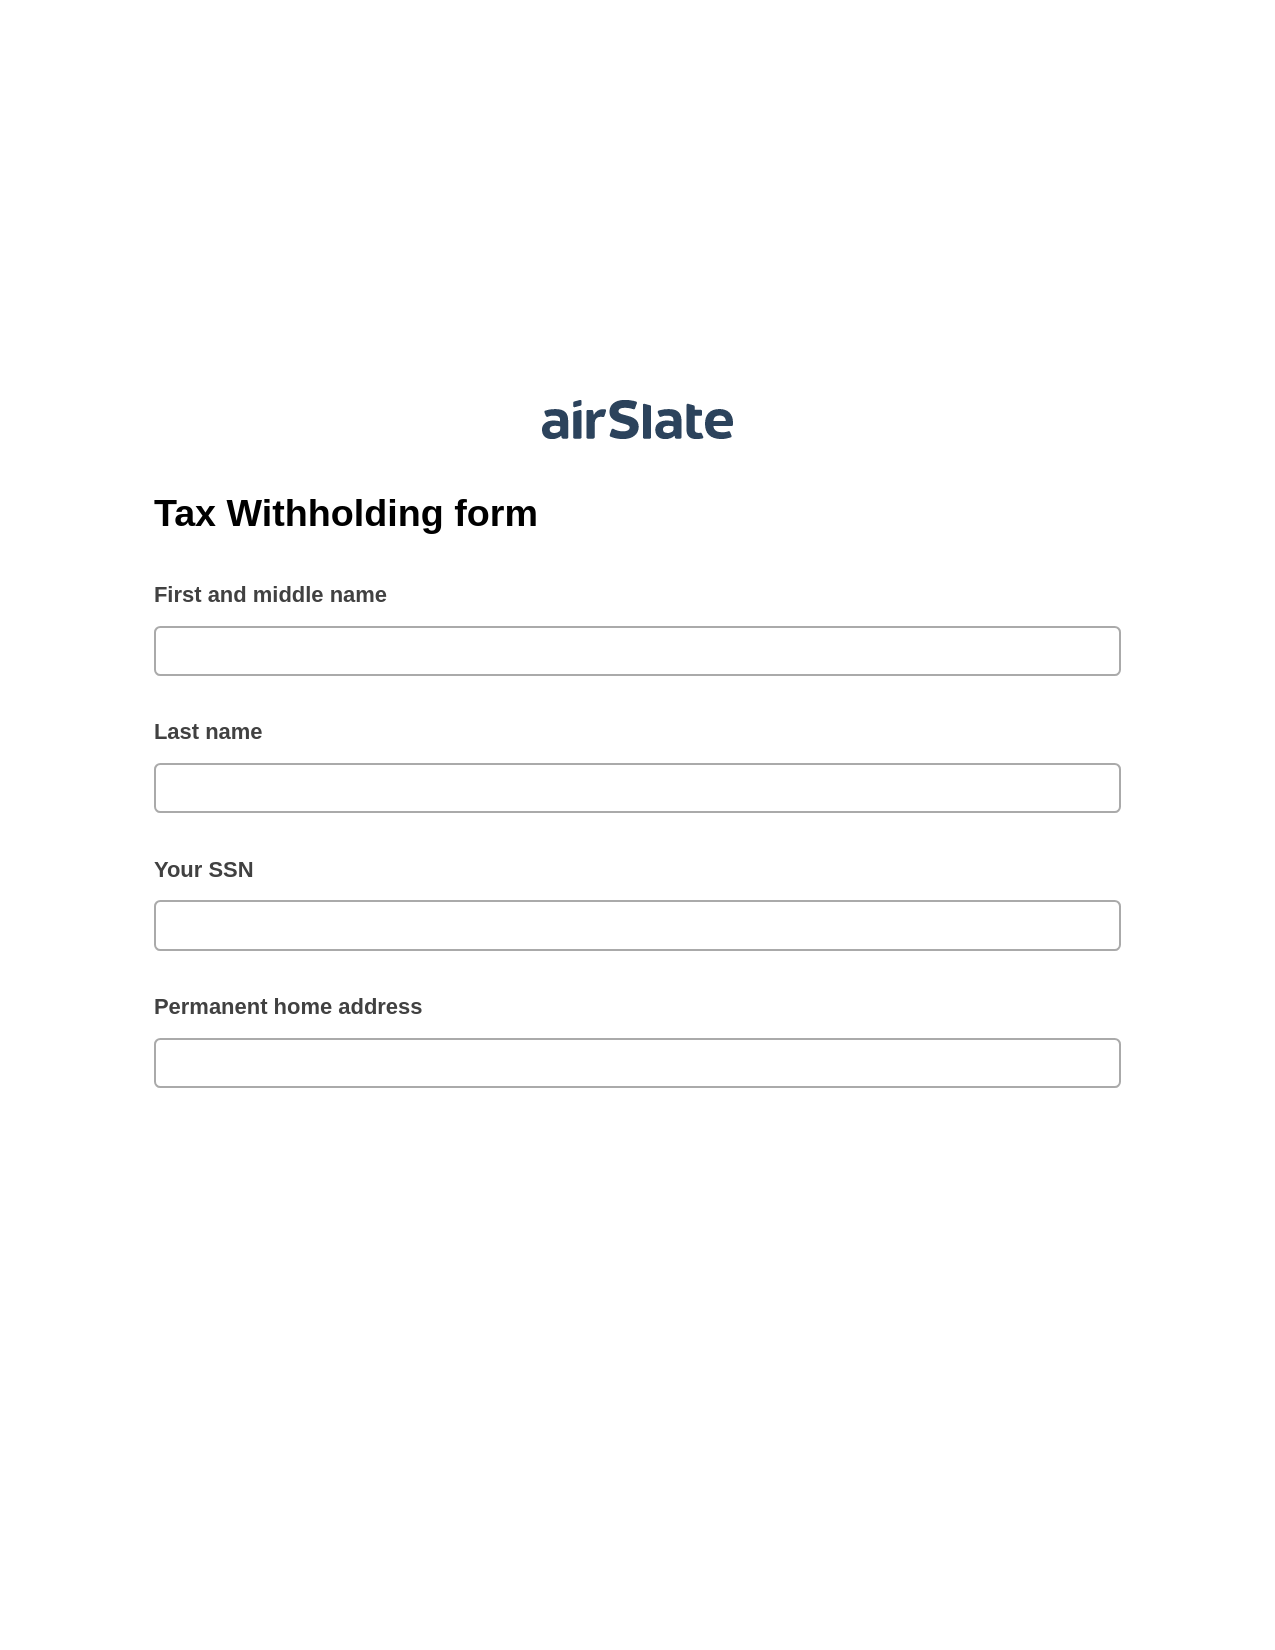 Tax Withholding form Pre-fill from CSV File Bot, SendGrid Send Campaign Bot, Export to Excel 365 Bot